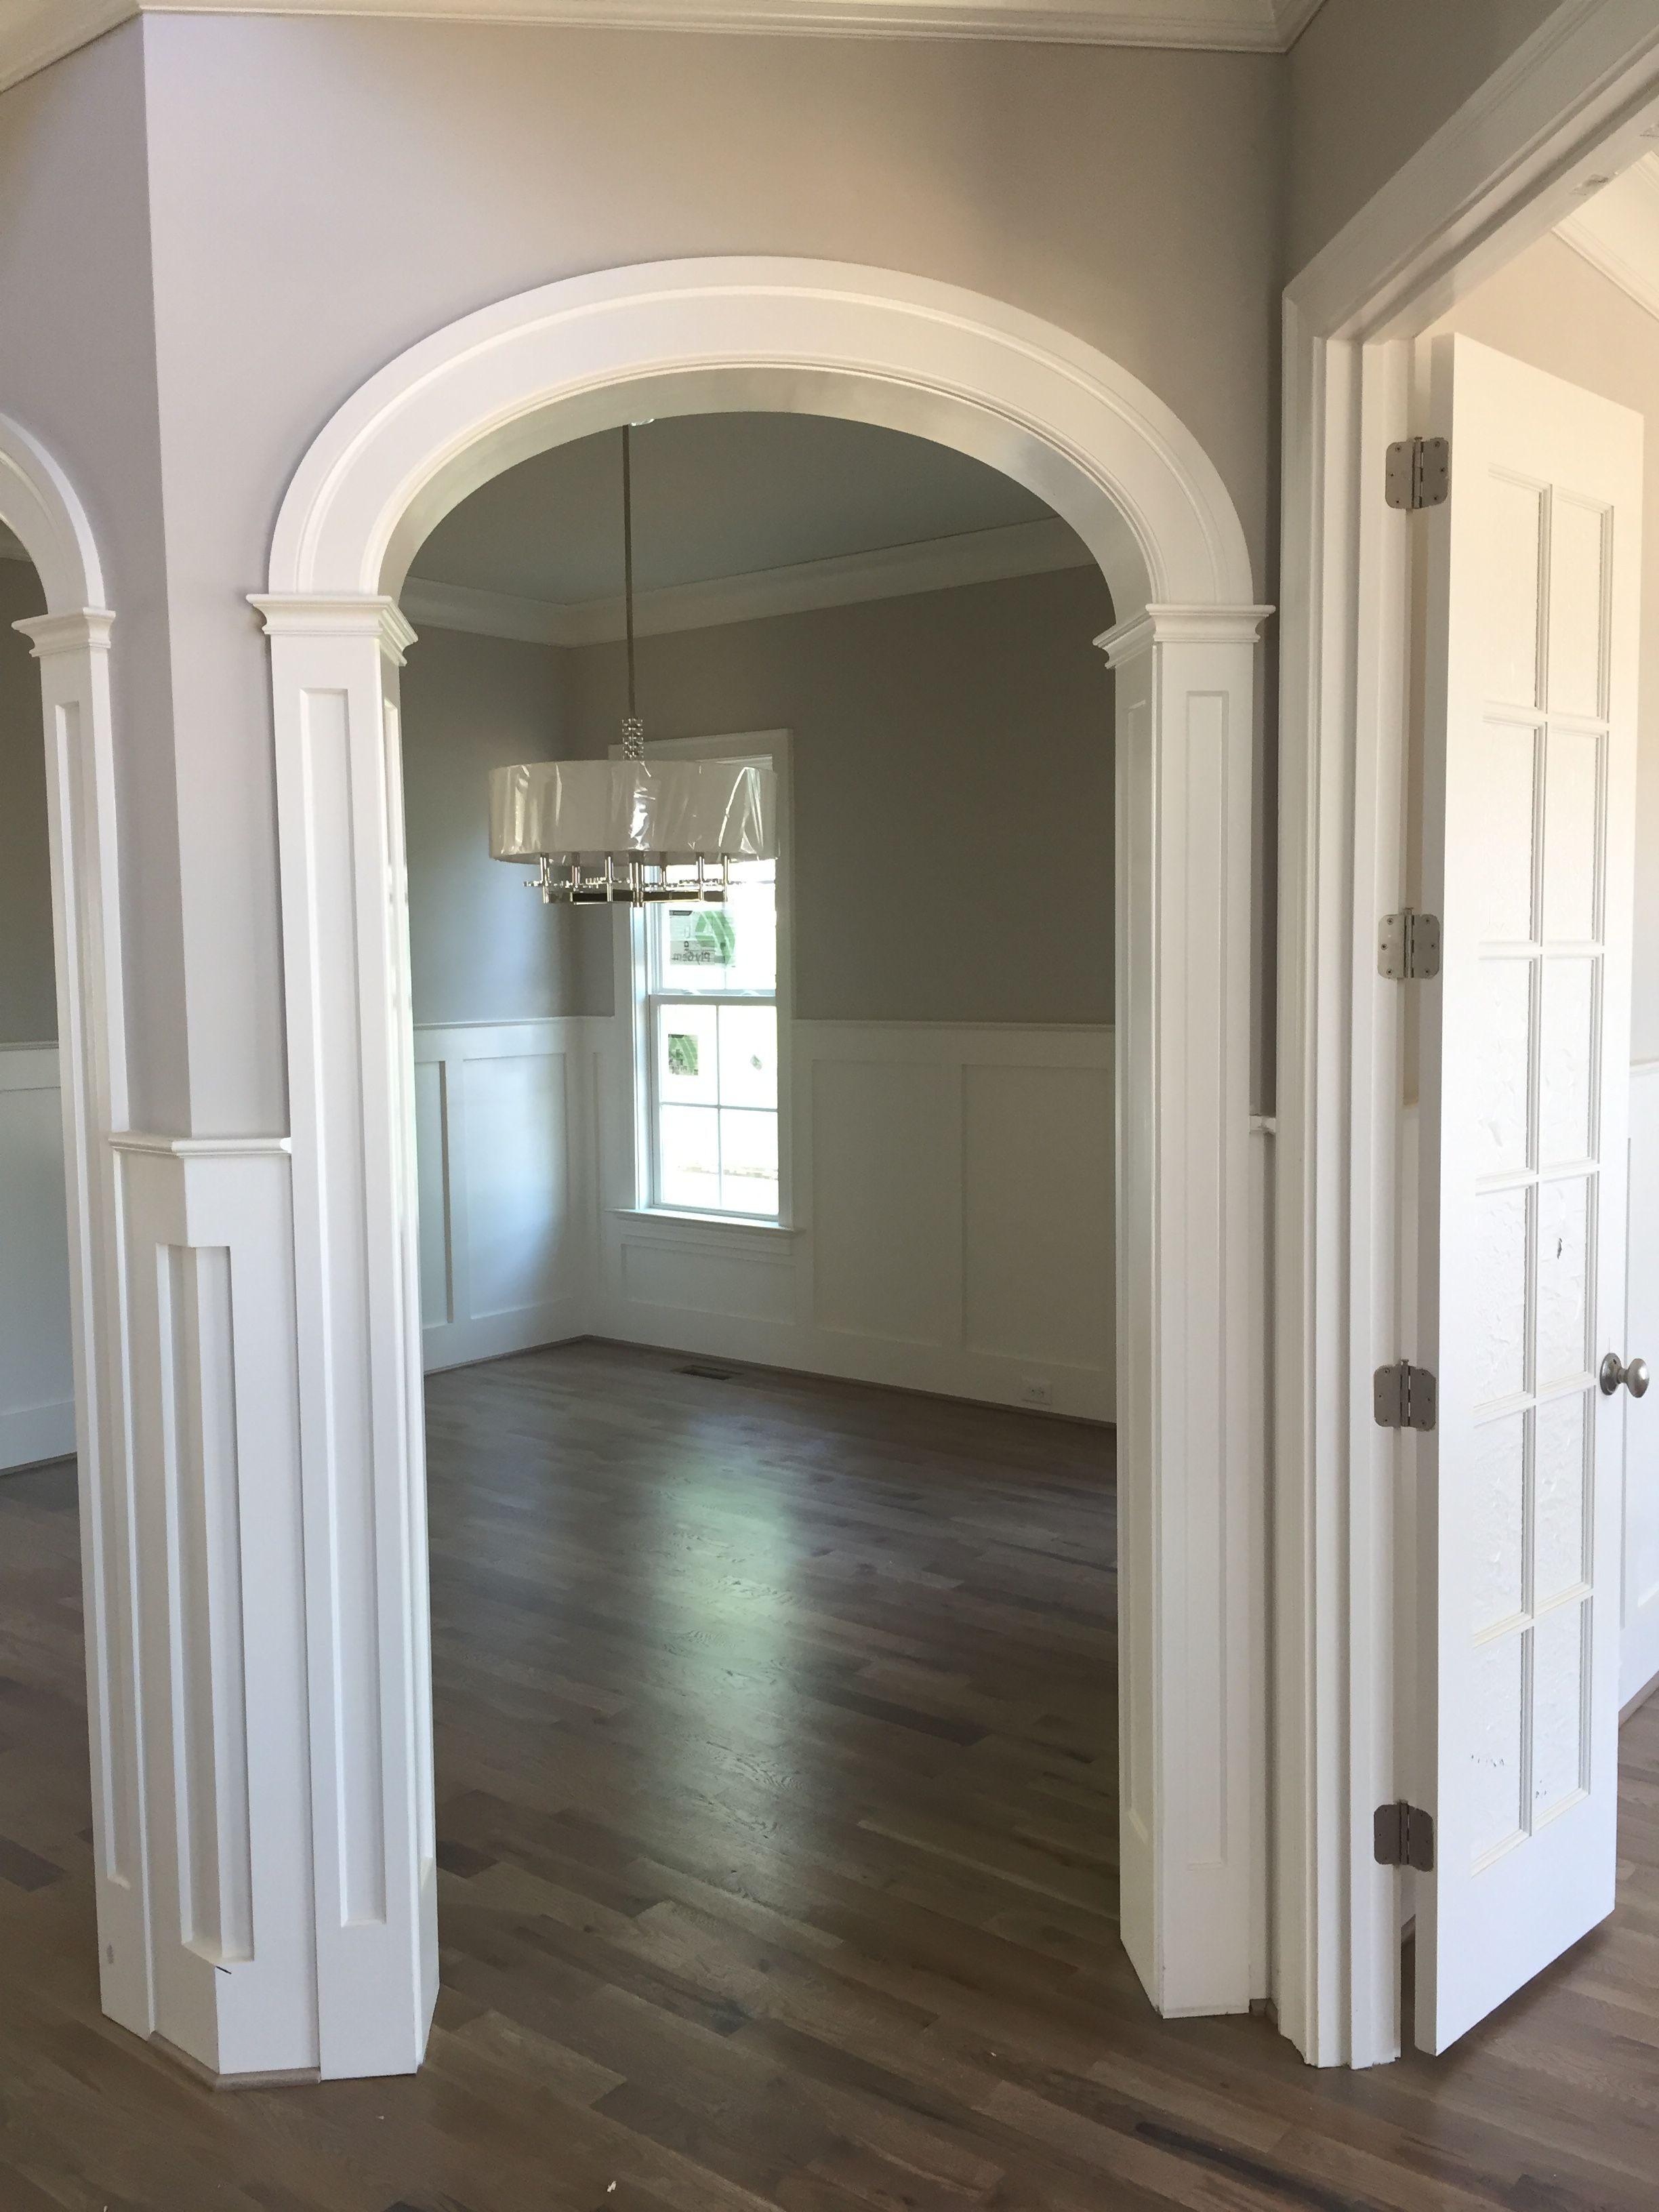 Decorative Details: Adding Mouldings And Panels To Interior Doors